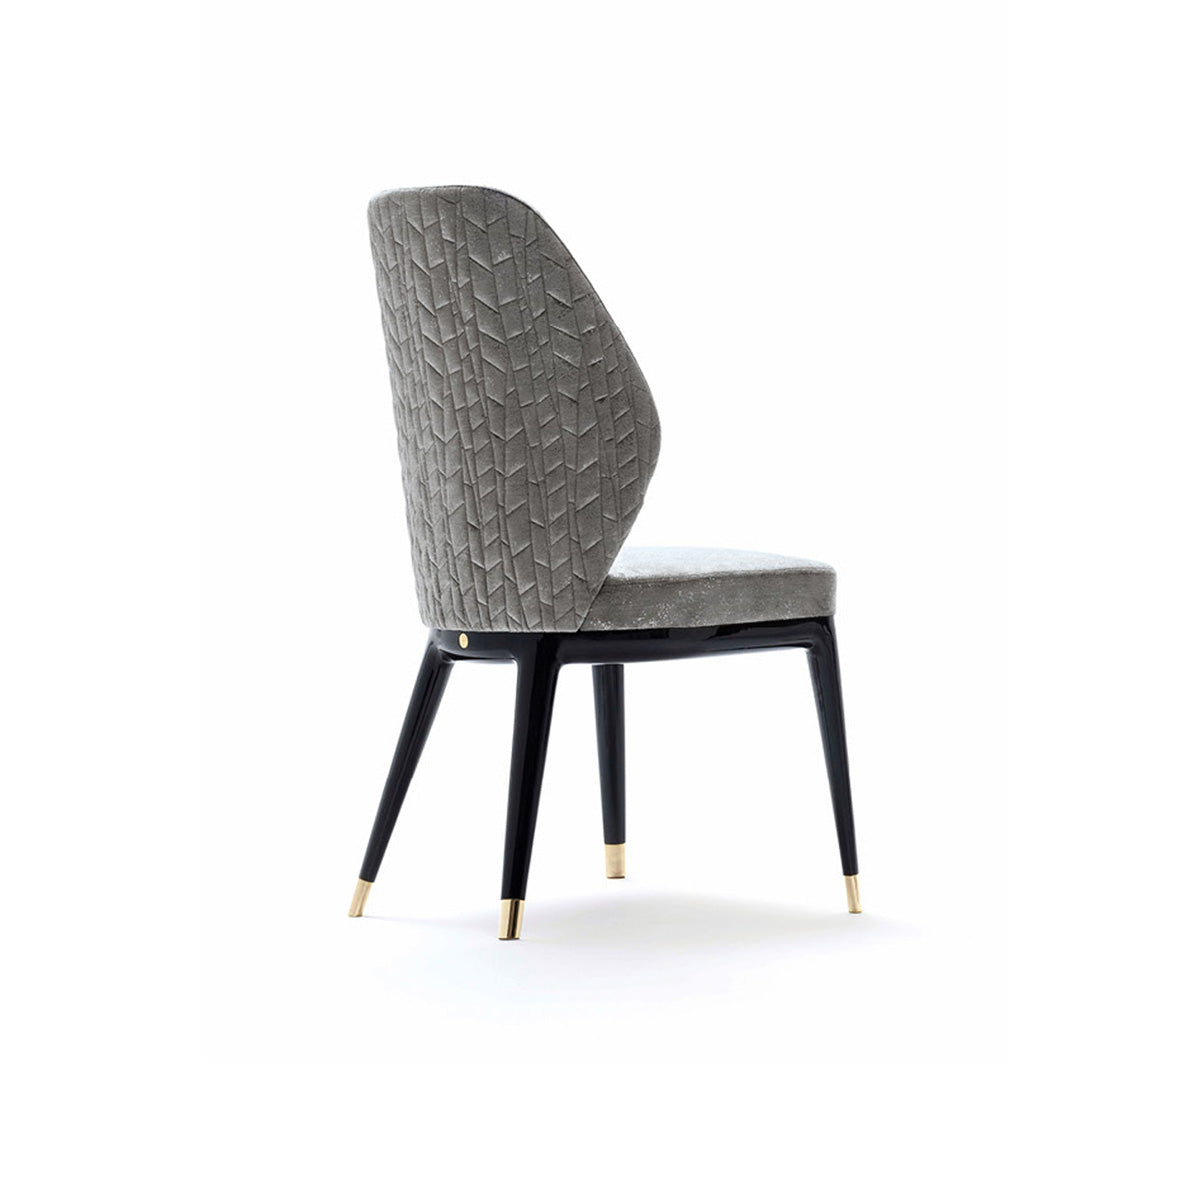 Charisma Dining chair